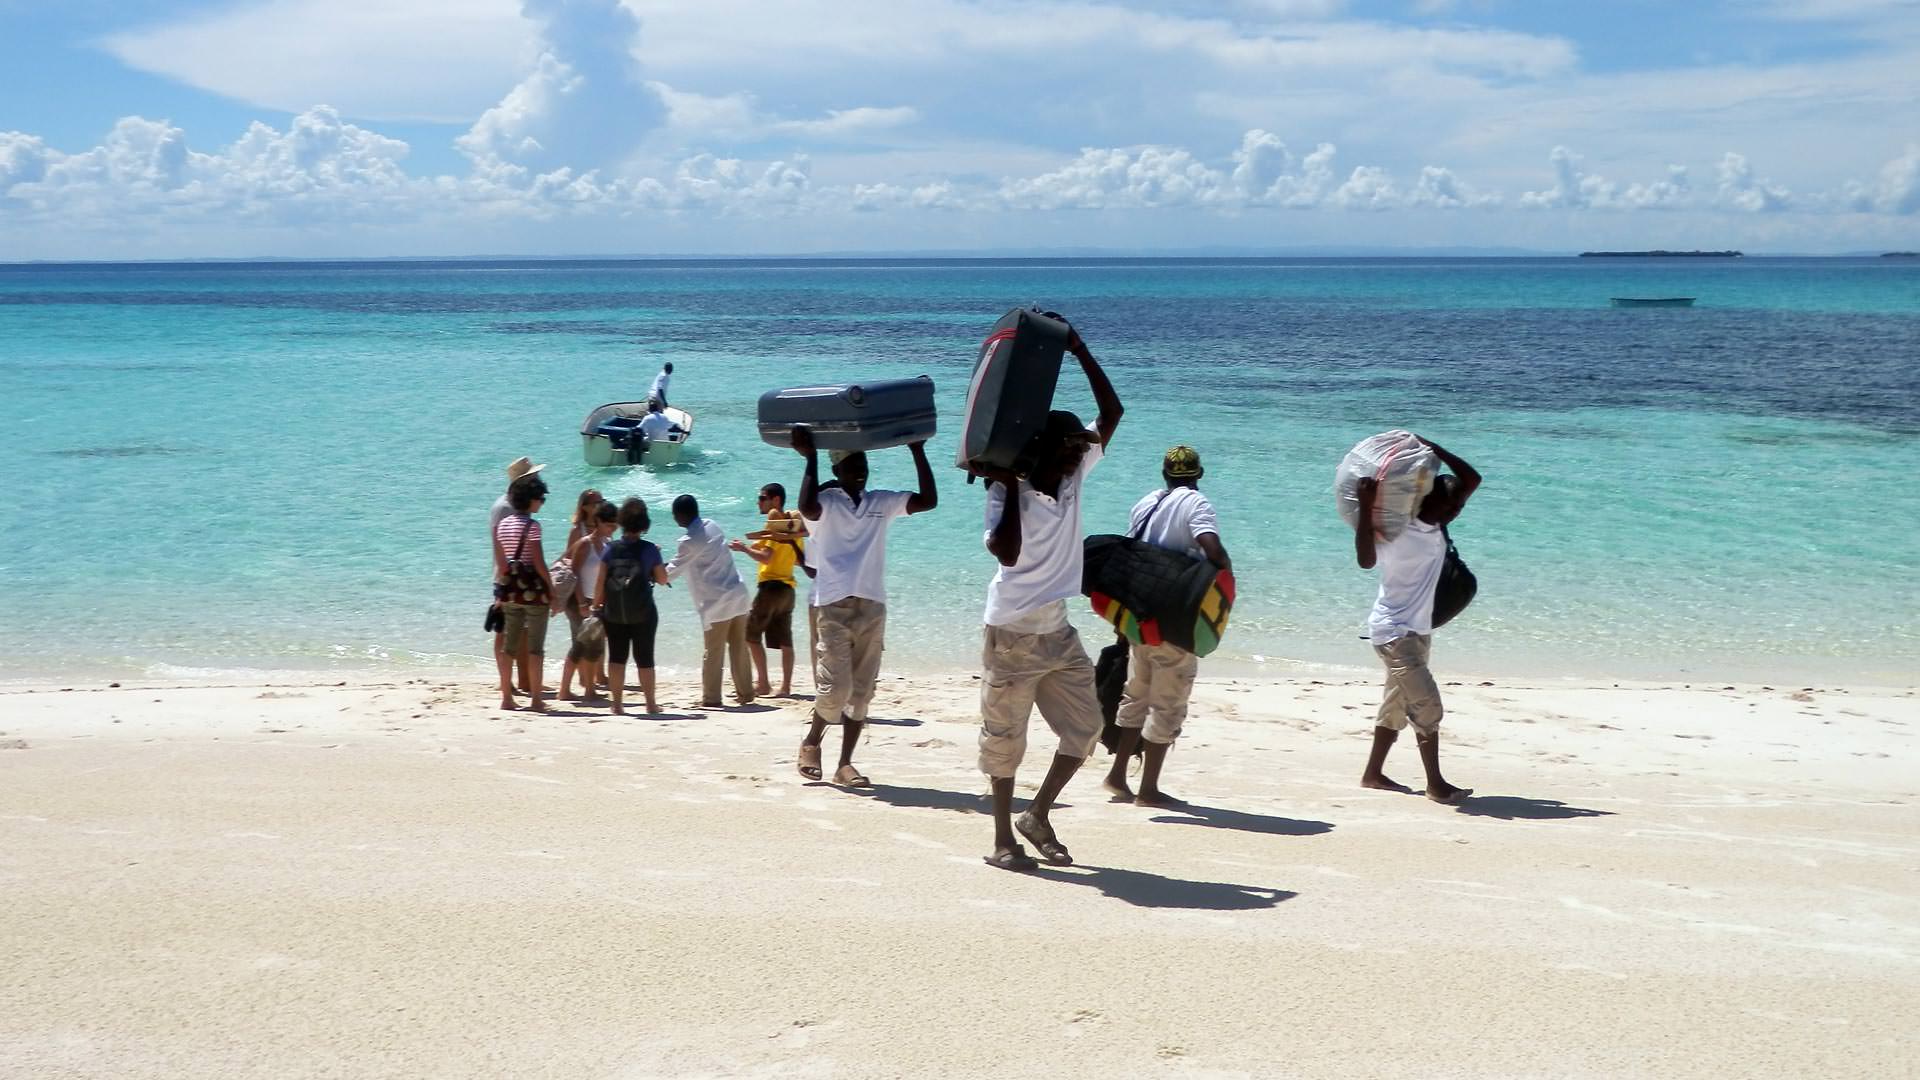 Fanjove Private Island - guests arriving by boat